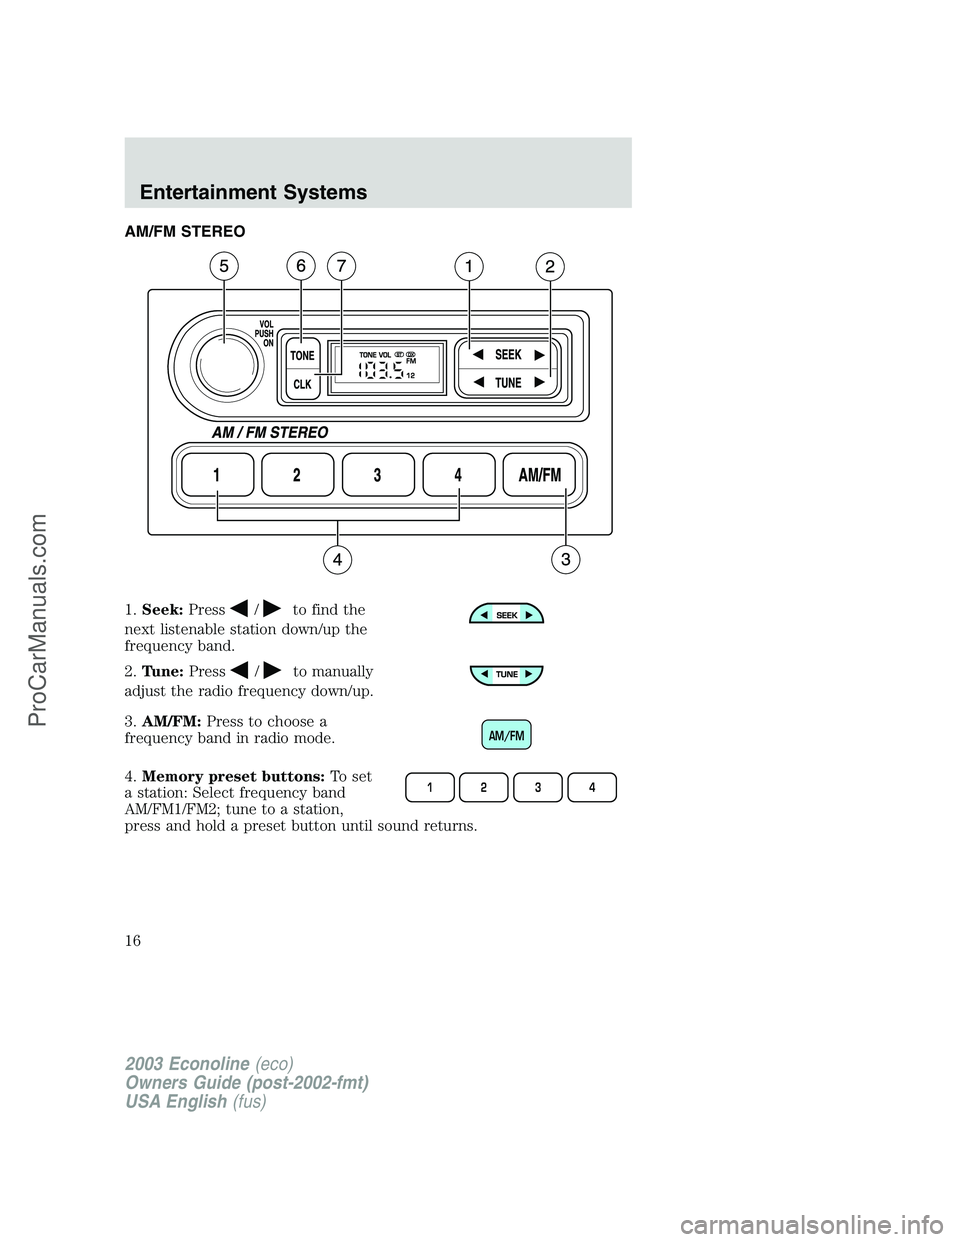 FORD E-450 2003  Owners Manual AM/FM STEREO
1.Seek:Press
/to find the
next listenable station down/up the
frequency band.
2.Tune:Press
/to manually
adjust the radio frequency down/up.
3.AM/FM:Press to choose a
frequency band in rad